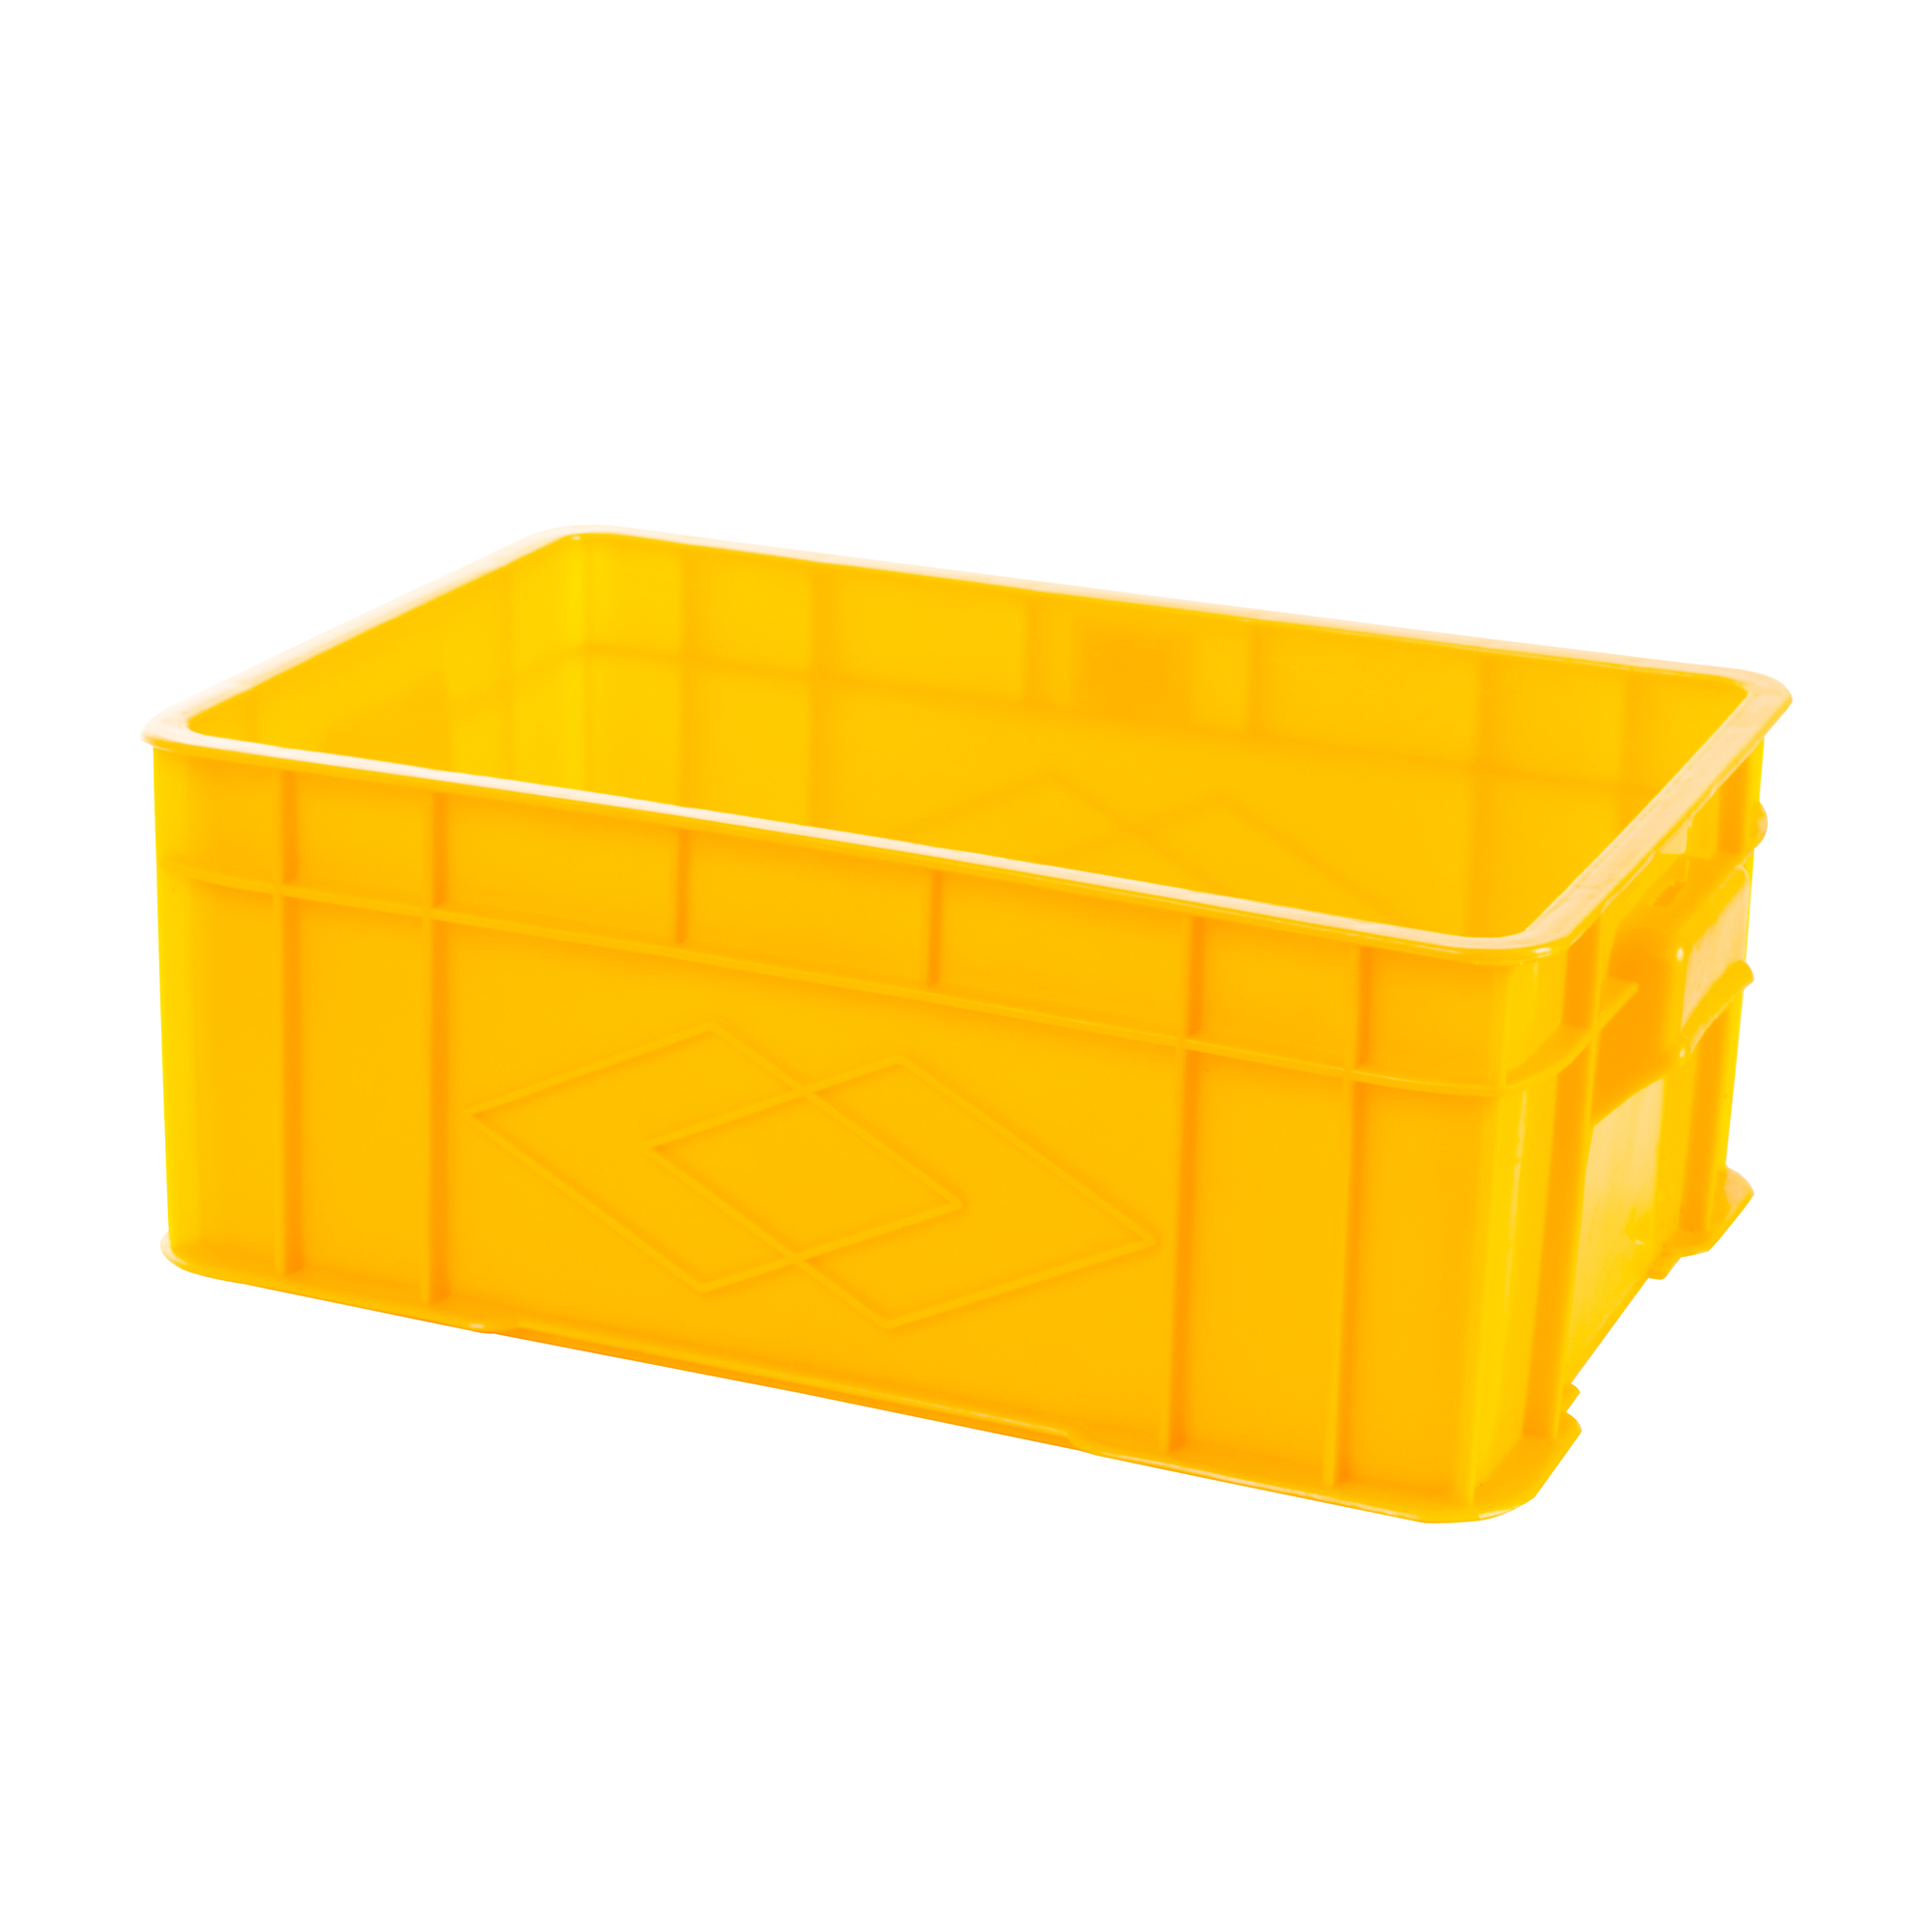 Stackable Containers, industrial Stackable Plastic Containers with